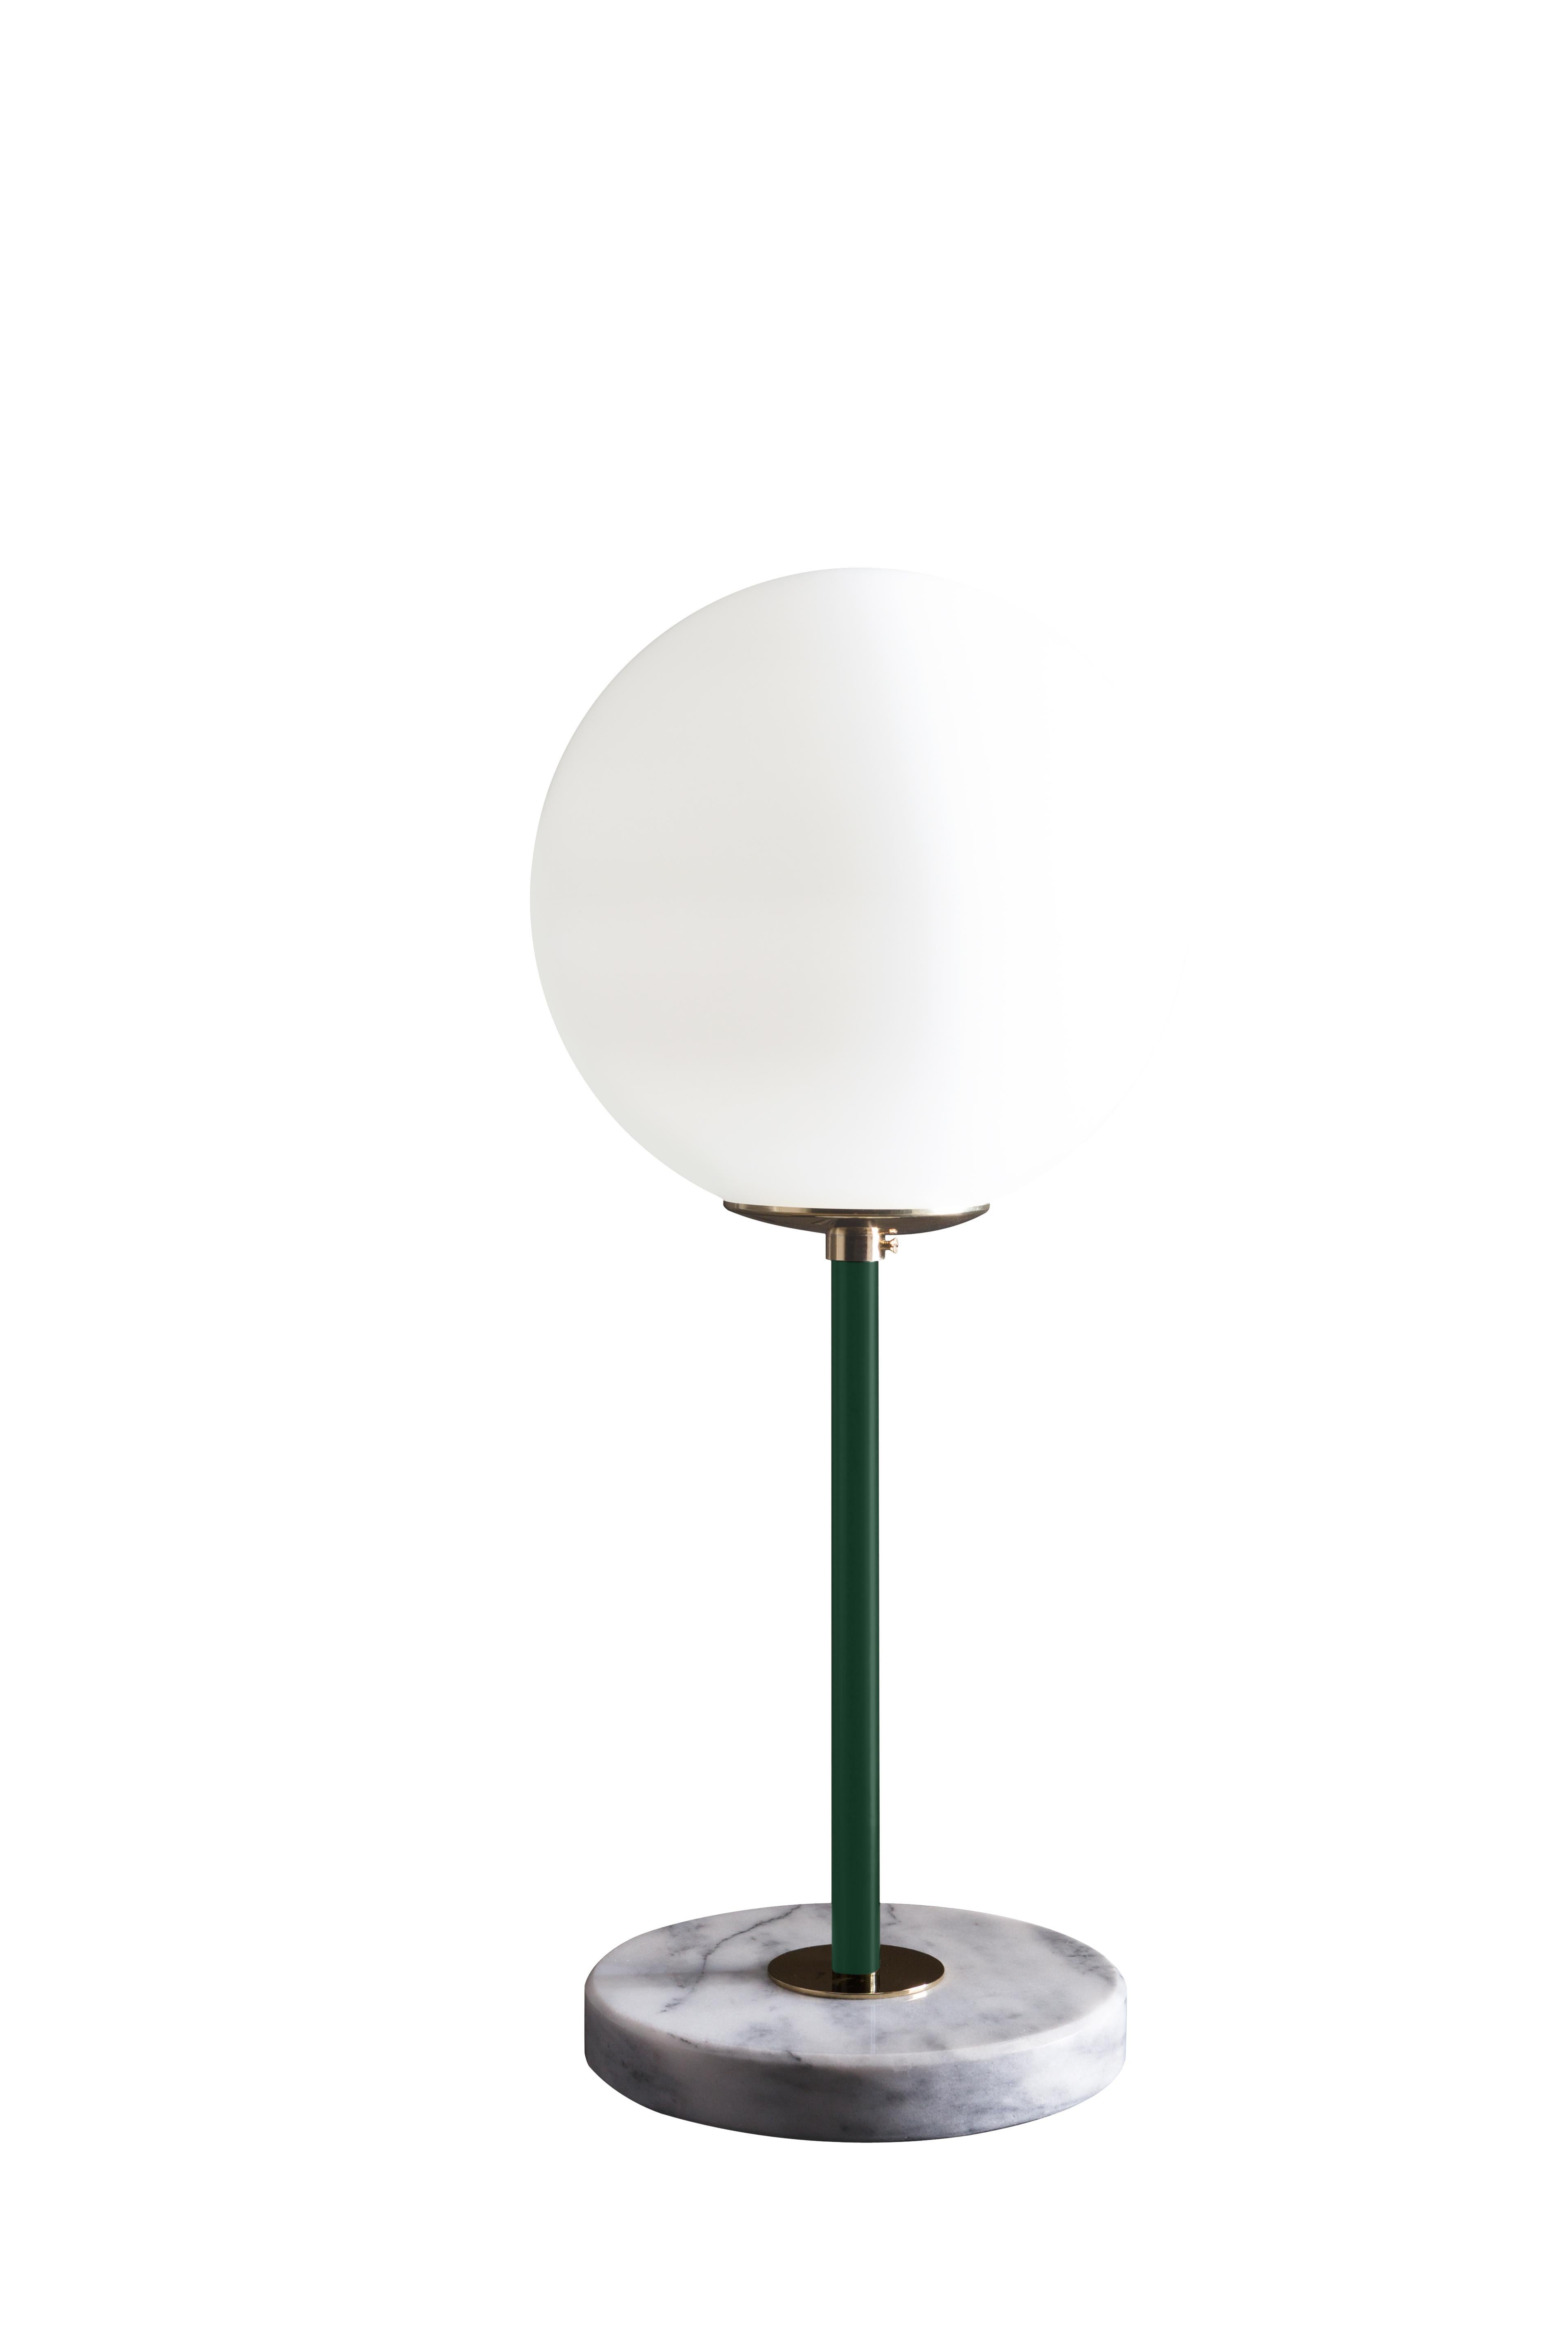 Green brass table lamp 06 by Magic Circus Editions
Dimensions: H 50 x W 22 cm
Materials: Smooth brass, mouth blown glass

Available finishes: Brass, nickel
Available colors (central tube): Black, green pine, red wine, mustard yellow, and